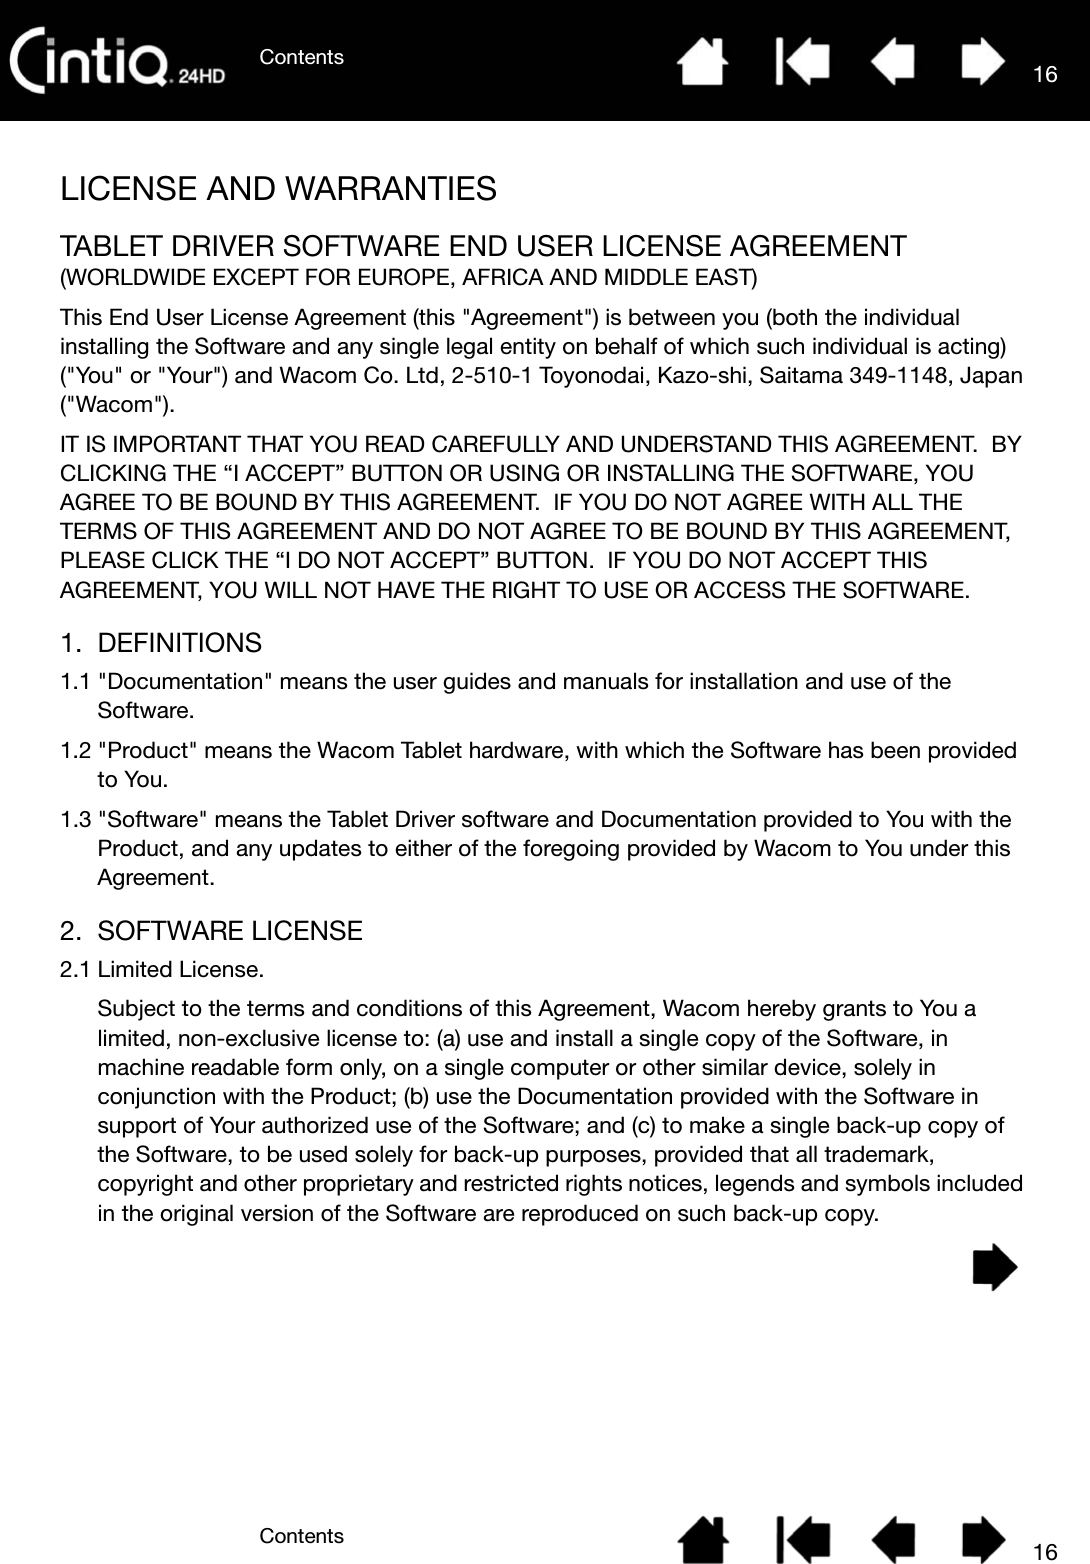 ContentsContents 1616LICENSE AND WARRANTIESTABLET DRIVER SOFTWARE END USER LICENSE AGREEMENT(WORLDWIDE EXCEPT FOR EUROPE, AFRICA AND MIDDLE EAST)This End User License Agreement (this &quot;Agreement&quot;) is between you (both the individual installing the Software and any single legal entity on behalf of which such individual is acting) (&quot;You&quot; or &quot;Your&quot;) and Wacom Co. Ltd, 2-510-1 Toyonodai, Kazo-shi, Saitama 349-1148, Japan (&quot;Wacom&quot;).IT IS IMPORTANT THAT YOU READ CAREFULLY AND UNDERSTAND THIS AGREEMENT.  BY CLICKING THE “I ACCEPT” BUTTON OR USING OR INSTALLING THE SOFTWARE, YOU AGREE TO BE BOUND BY THIS AGREEMENT.  IF YOU DO NOT AGREE WITH ALL THE TERMS OF THIS AGREEMENT AND DO NOT AGREE TO BE BOUND BY THIS AGREEMENT, PLEASE CLICK THE “I DO NOT ACCEPT” BUTTON.  IF YOU DO NOT ACCEPT THIS AGREEMENT, YOU WILL NOT HAVE THE RIGHT TO USE OR ACCESS THE SOFTWARE.1. DEFINITIONS1.1 &quot;Documentation&quot; means the user guides and manuals for installation and use of the Software.1.2 &quot;Product&quot; means the Wacom Tablet hardware, with which the Software has been provided to You.1.3 &quot;Software&quot; means the Tablet Driver software and Documentation provided to You with the Product, and any updates to either of the foregoing provided by Wacom to You under this Agreement.2. SOFTWARE LICENSE2.1 Limited License.Subject to the terms and conditions of this Agreement, Wacom hereby grants to You a limited, non-exclusive license to: (a) use and install a single copy of the Software, in machine readable form only, on a single computer or other similar device, solely in conjunction with the Product; (b) use the Documentation provided with the Software in support of Your authorized use of the Software; and (c) to make a single back-up copy of the Software, to be used solely for back-up purposes, provided that all trademark, copyright and other proprietary and restricted rights notices, legends and symbols included in the original version of the Software are reproduced on such back-up copy.